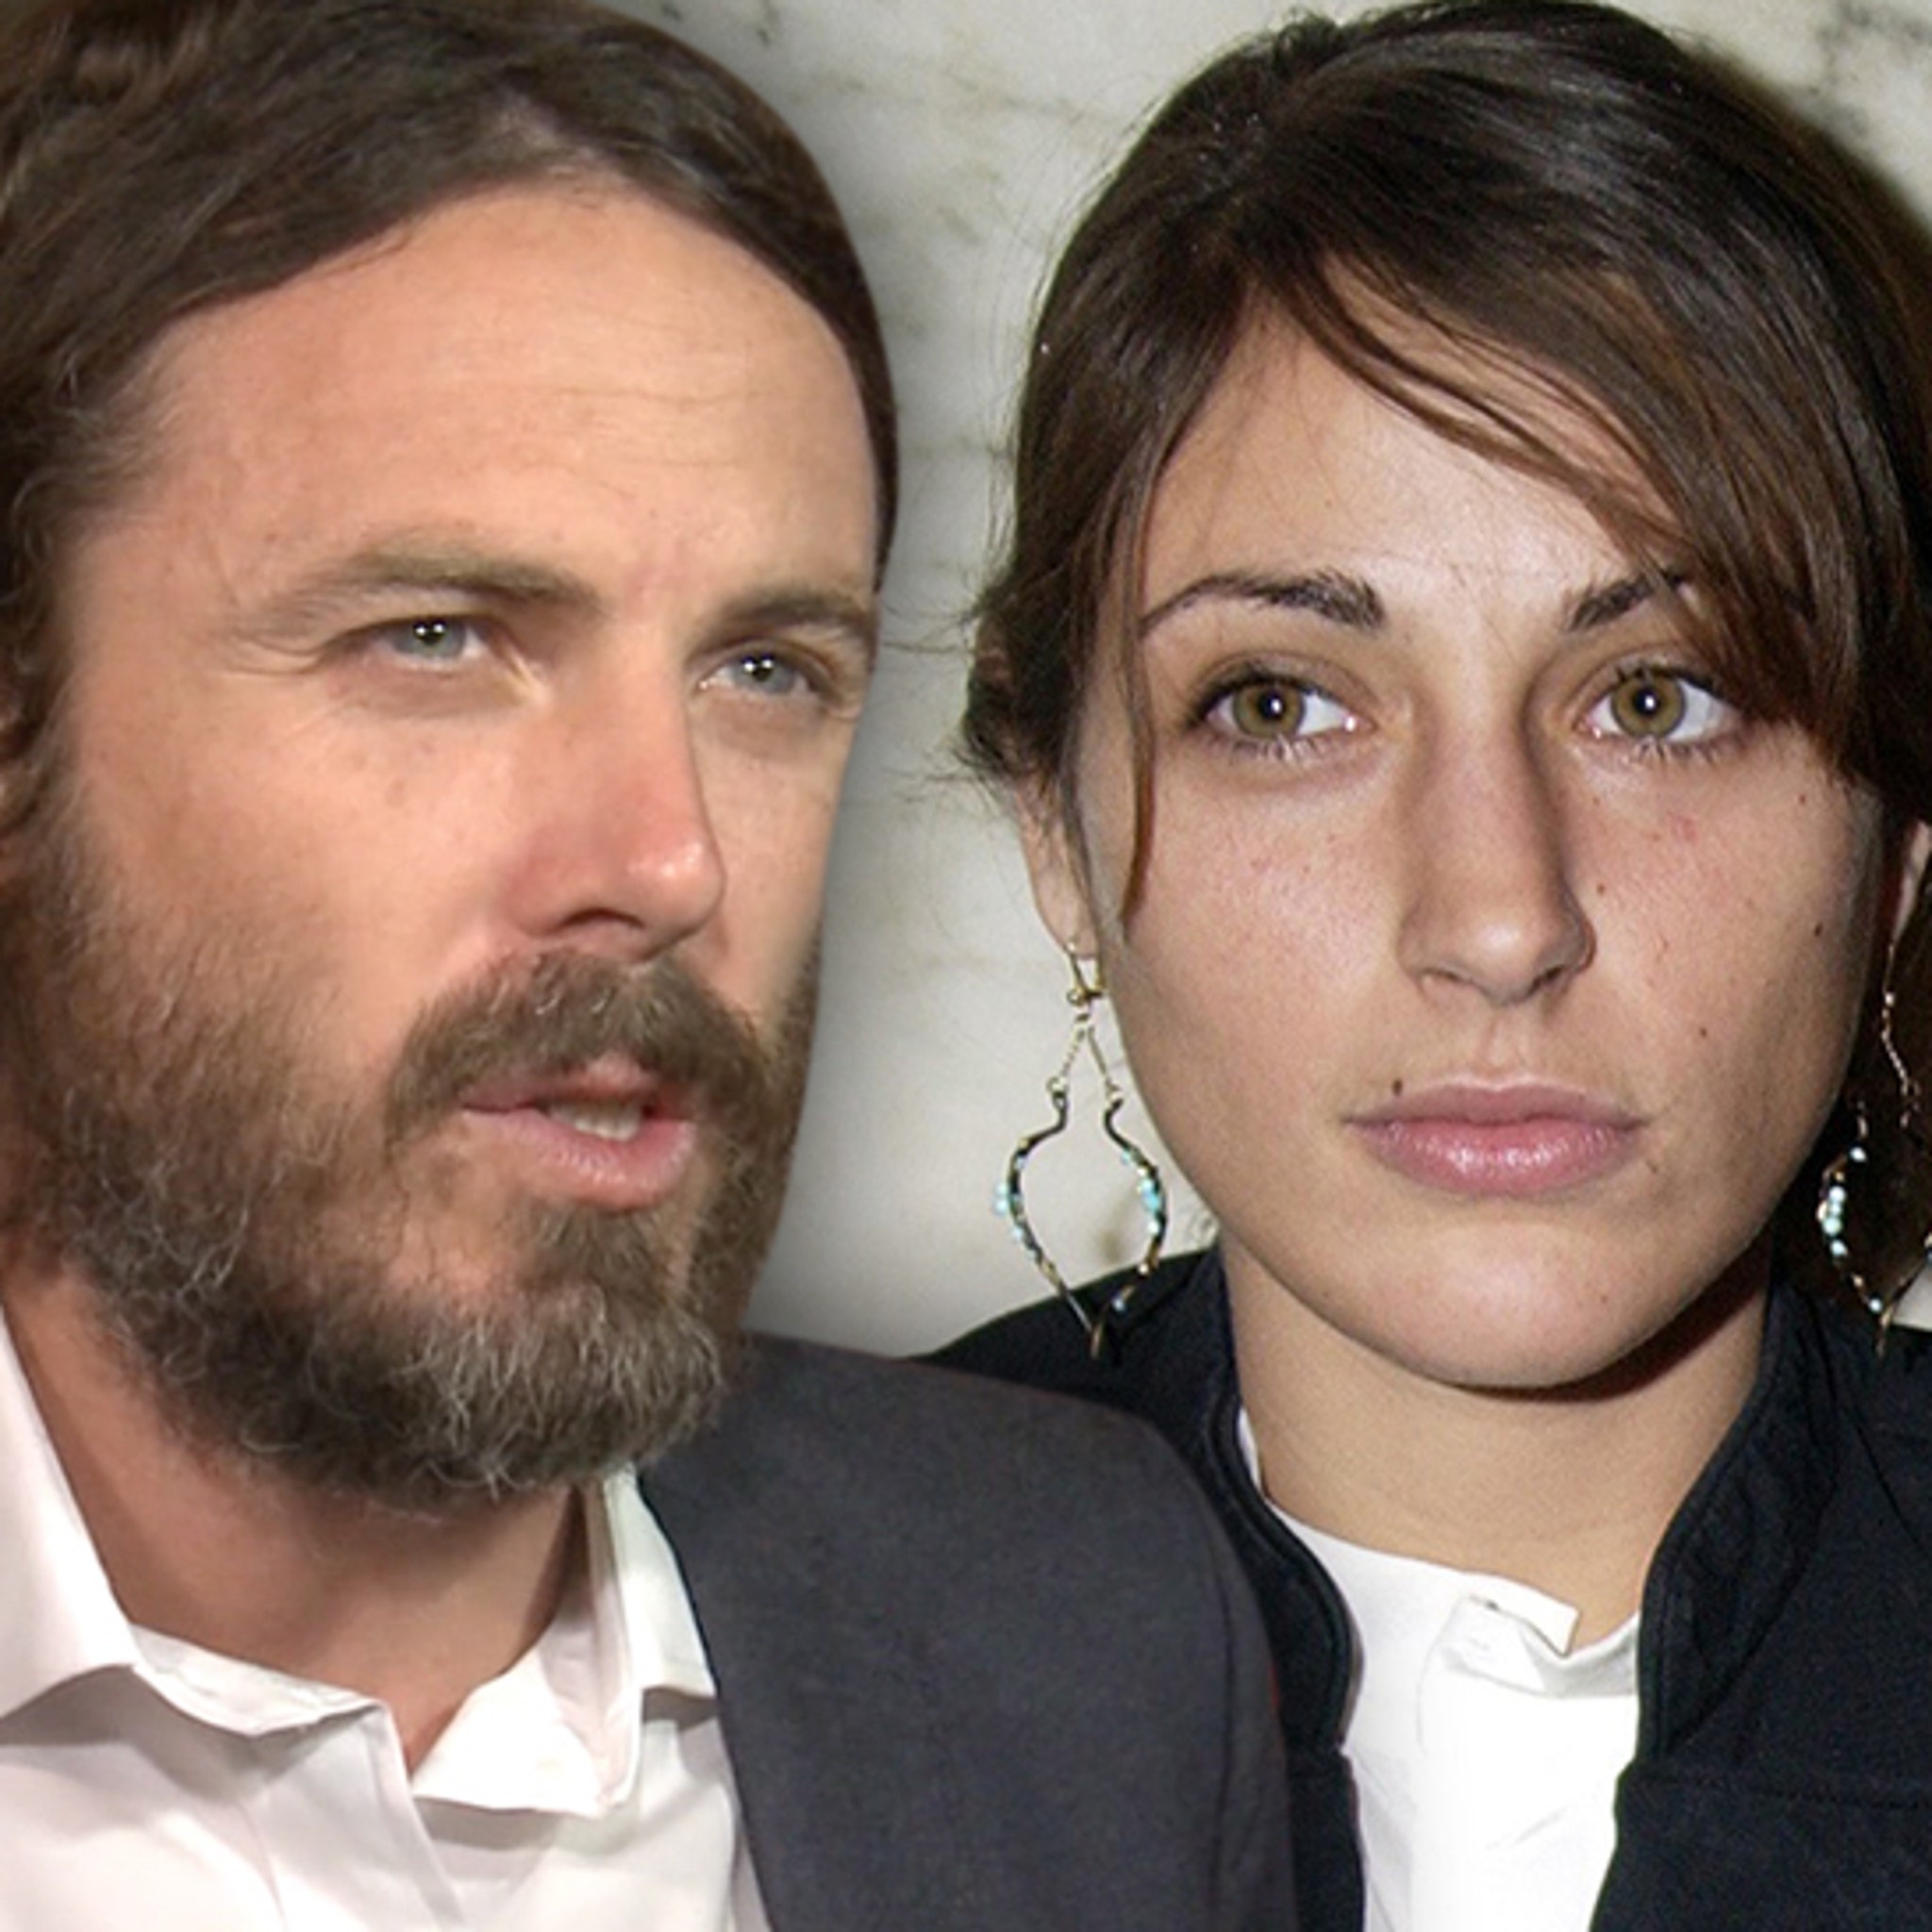 Casey Affleck seems UPSET with girlfriend as they have row in